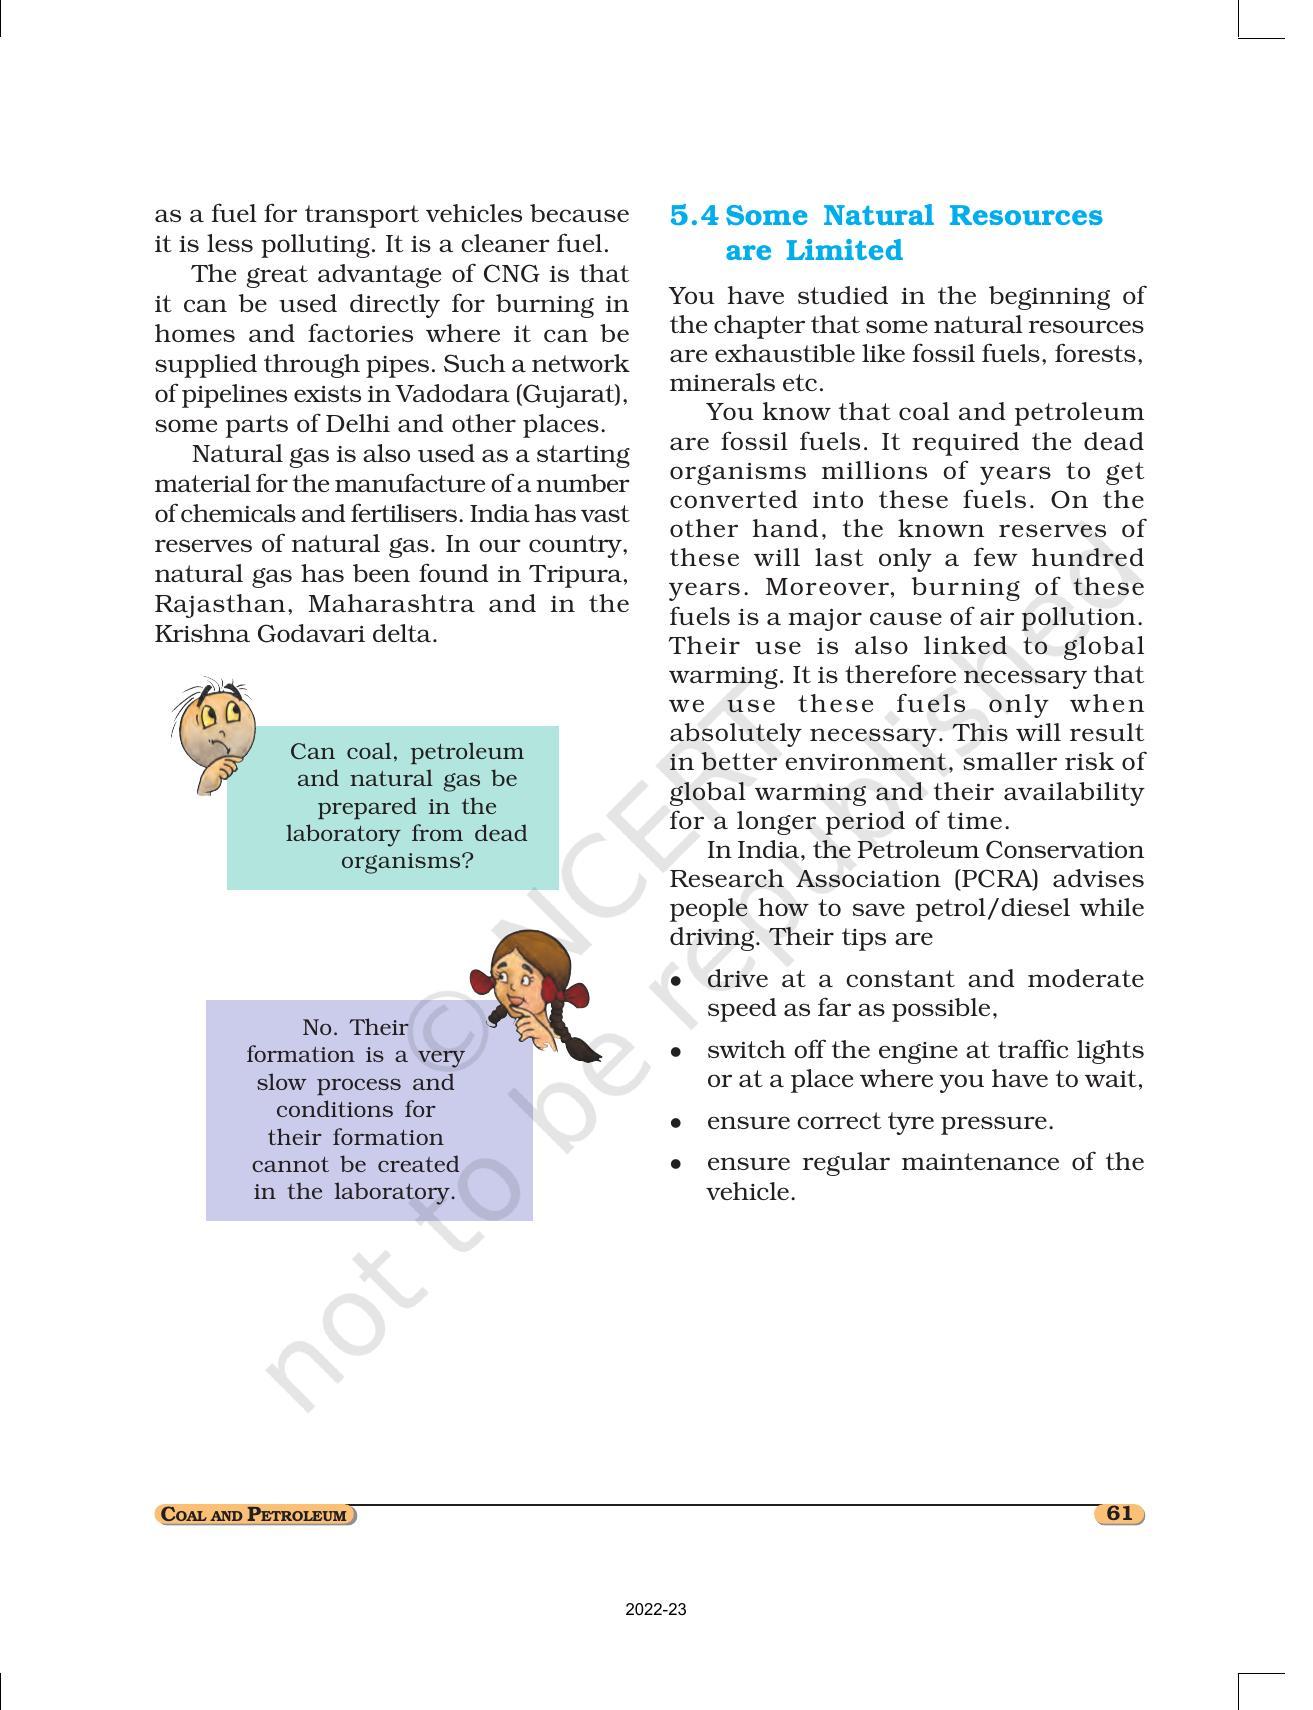 NCERT Book for Class 8 Science Chapter 5 Coal and Petroleum - Page 6